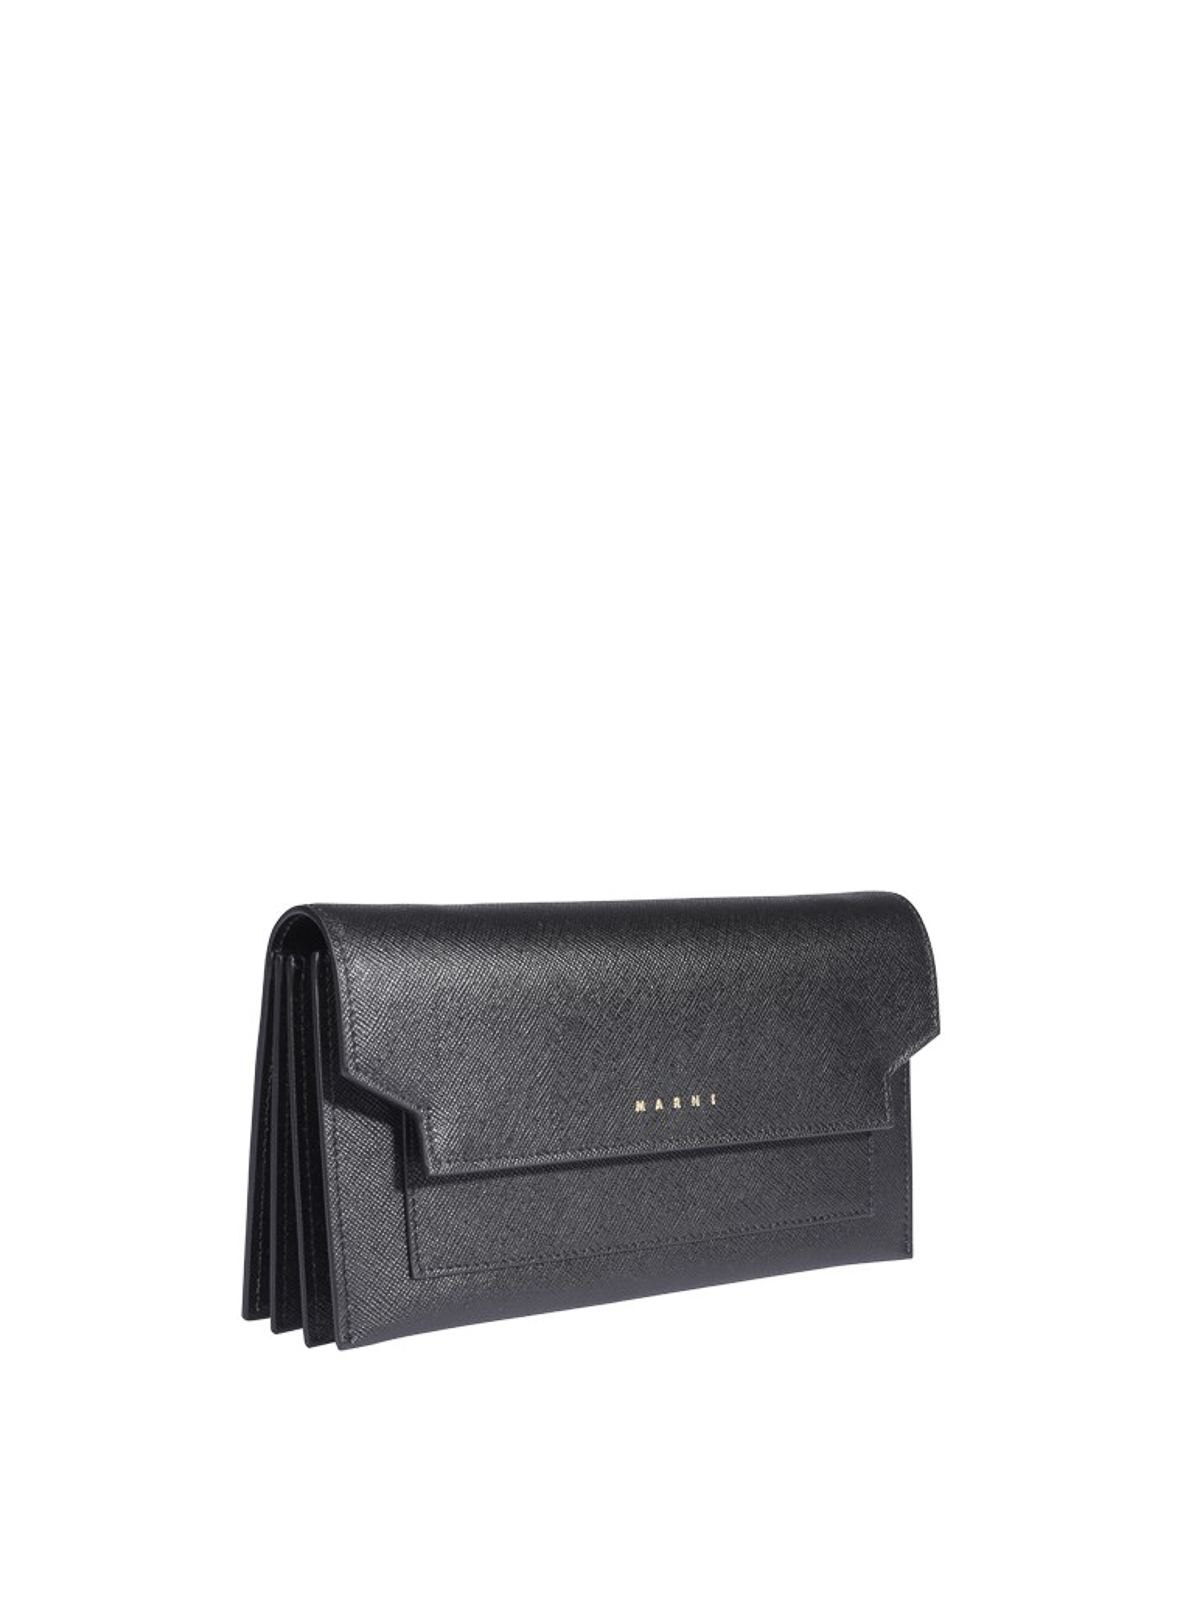 Black Saffiano And Leather Wallet With Shoulder Strap